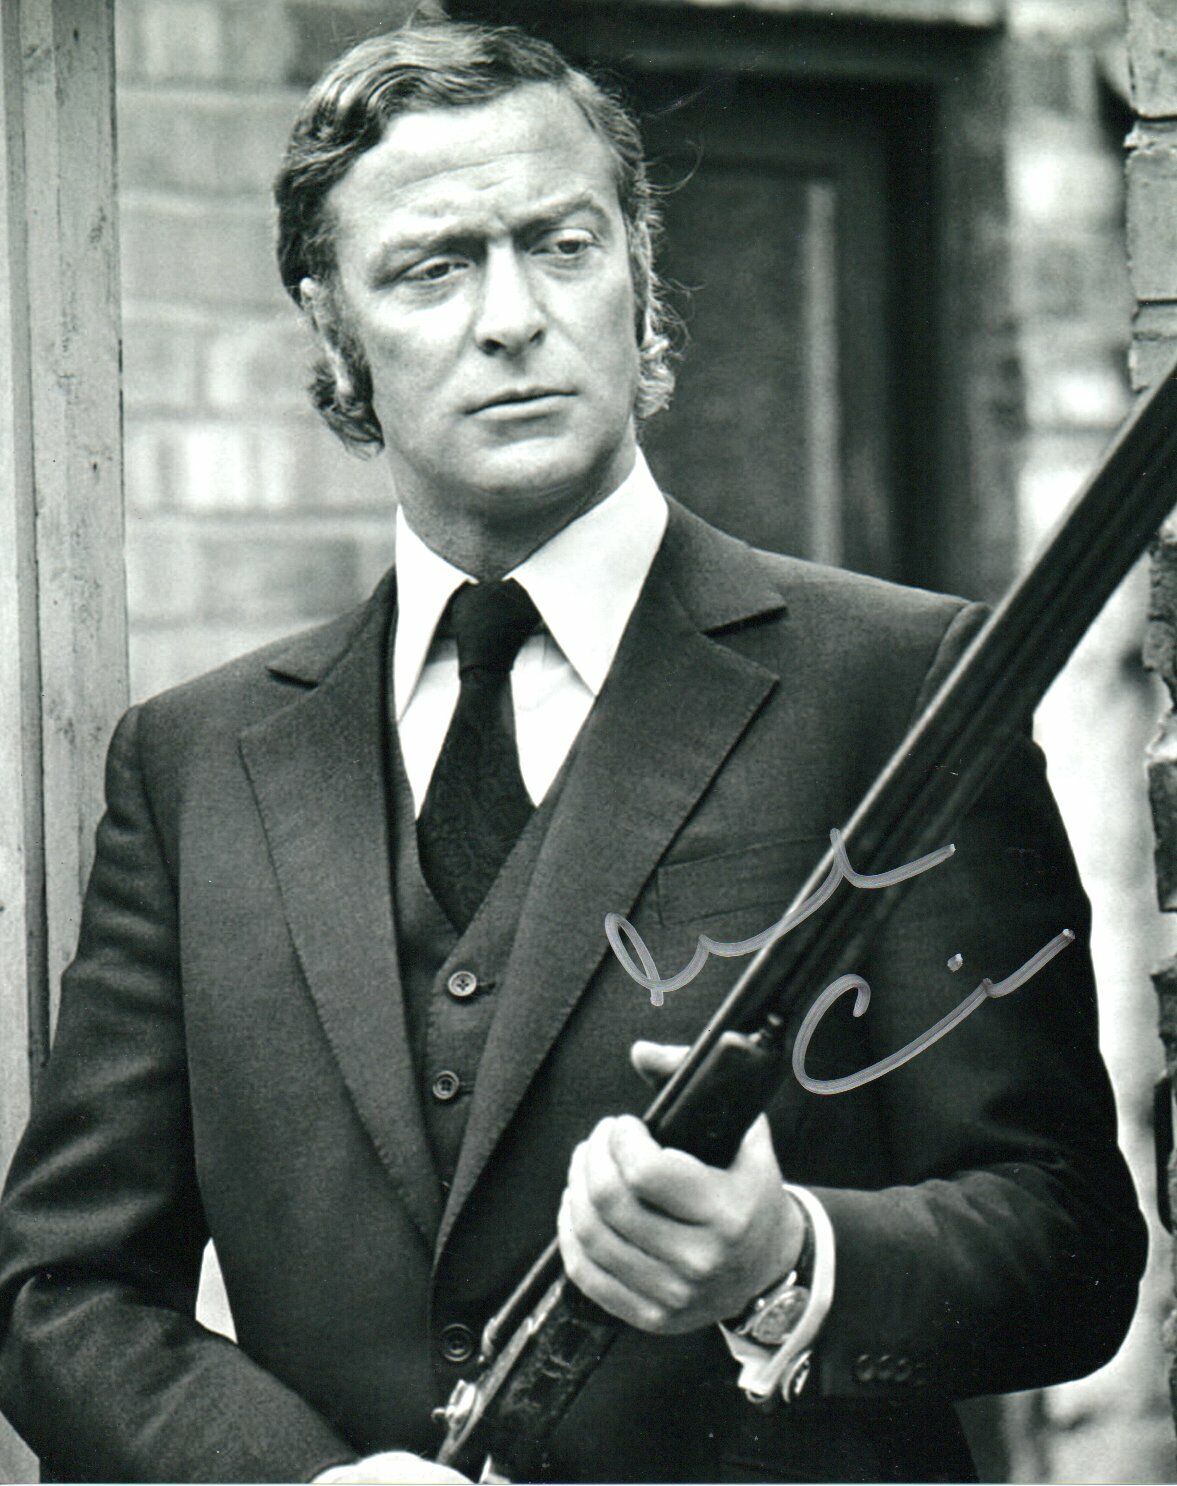 Michael Caine Signed 10x8 Photo Poster painting Film Star Autograph